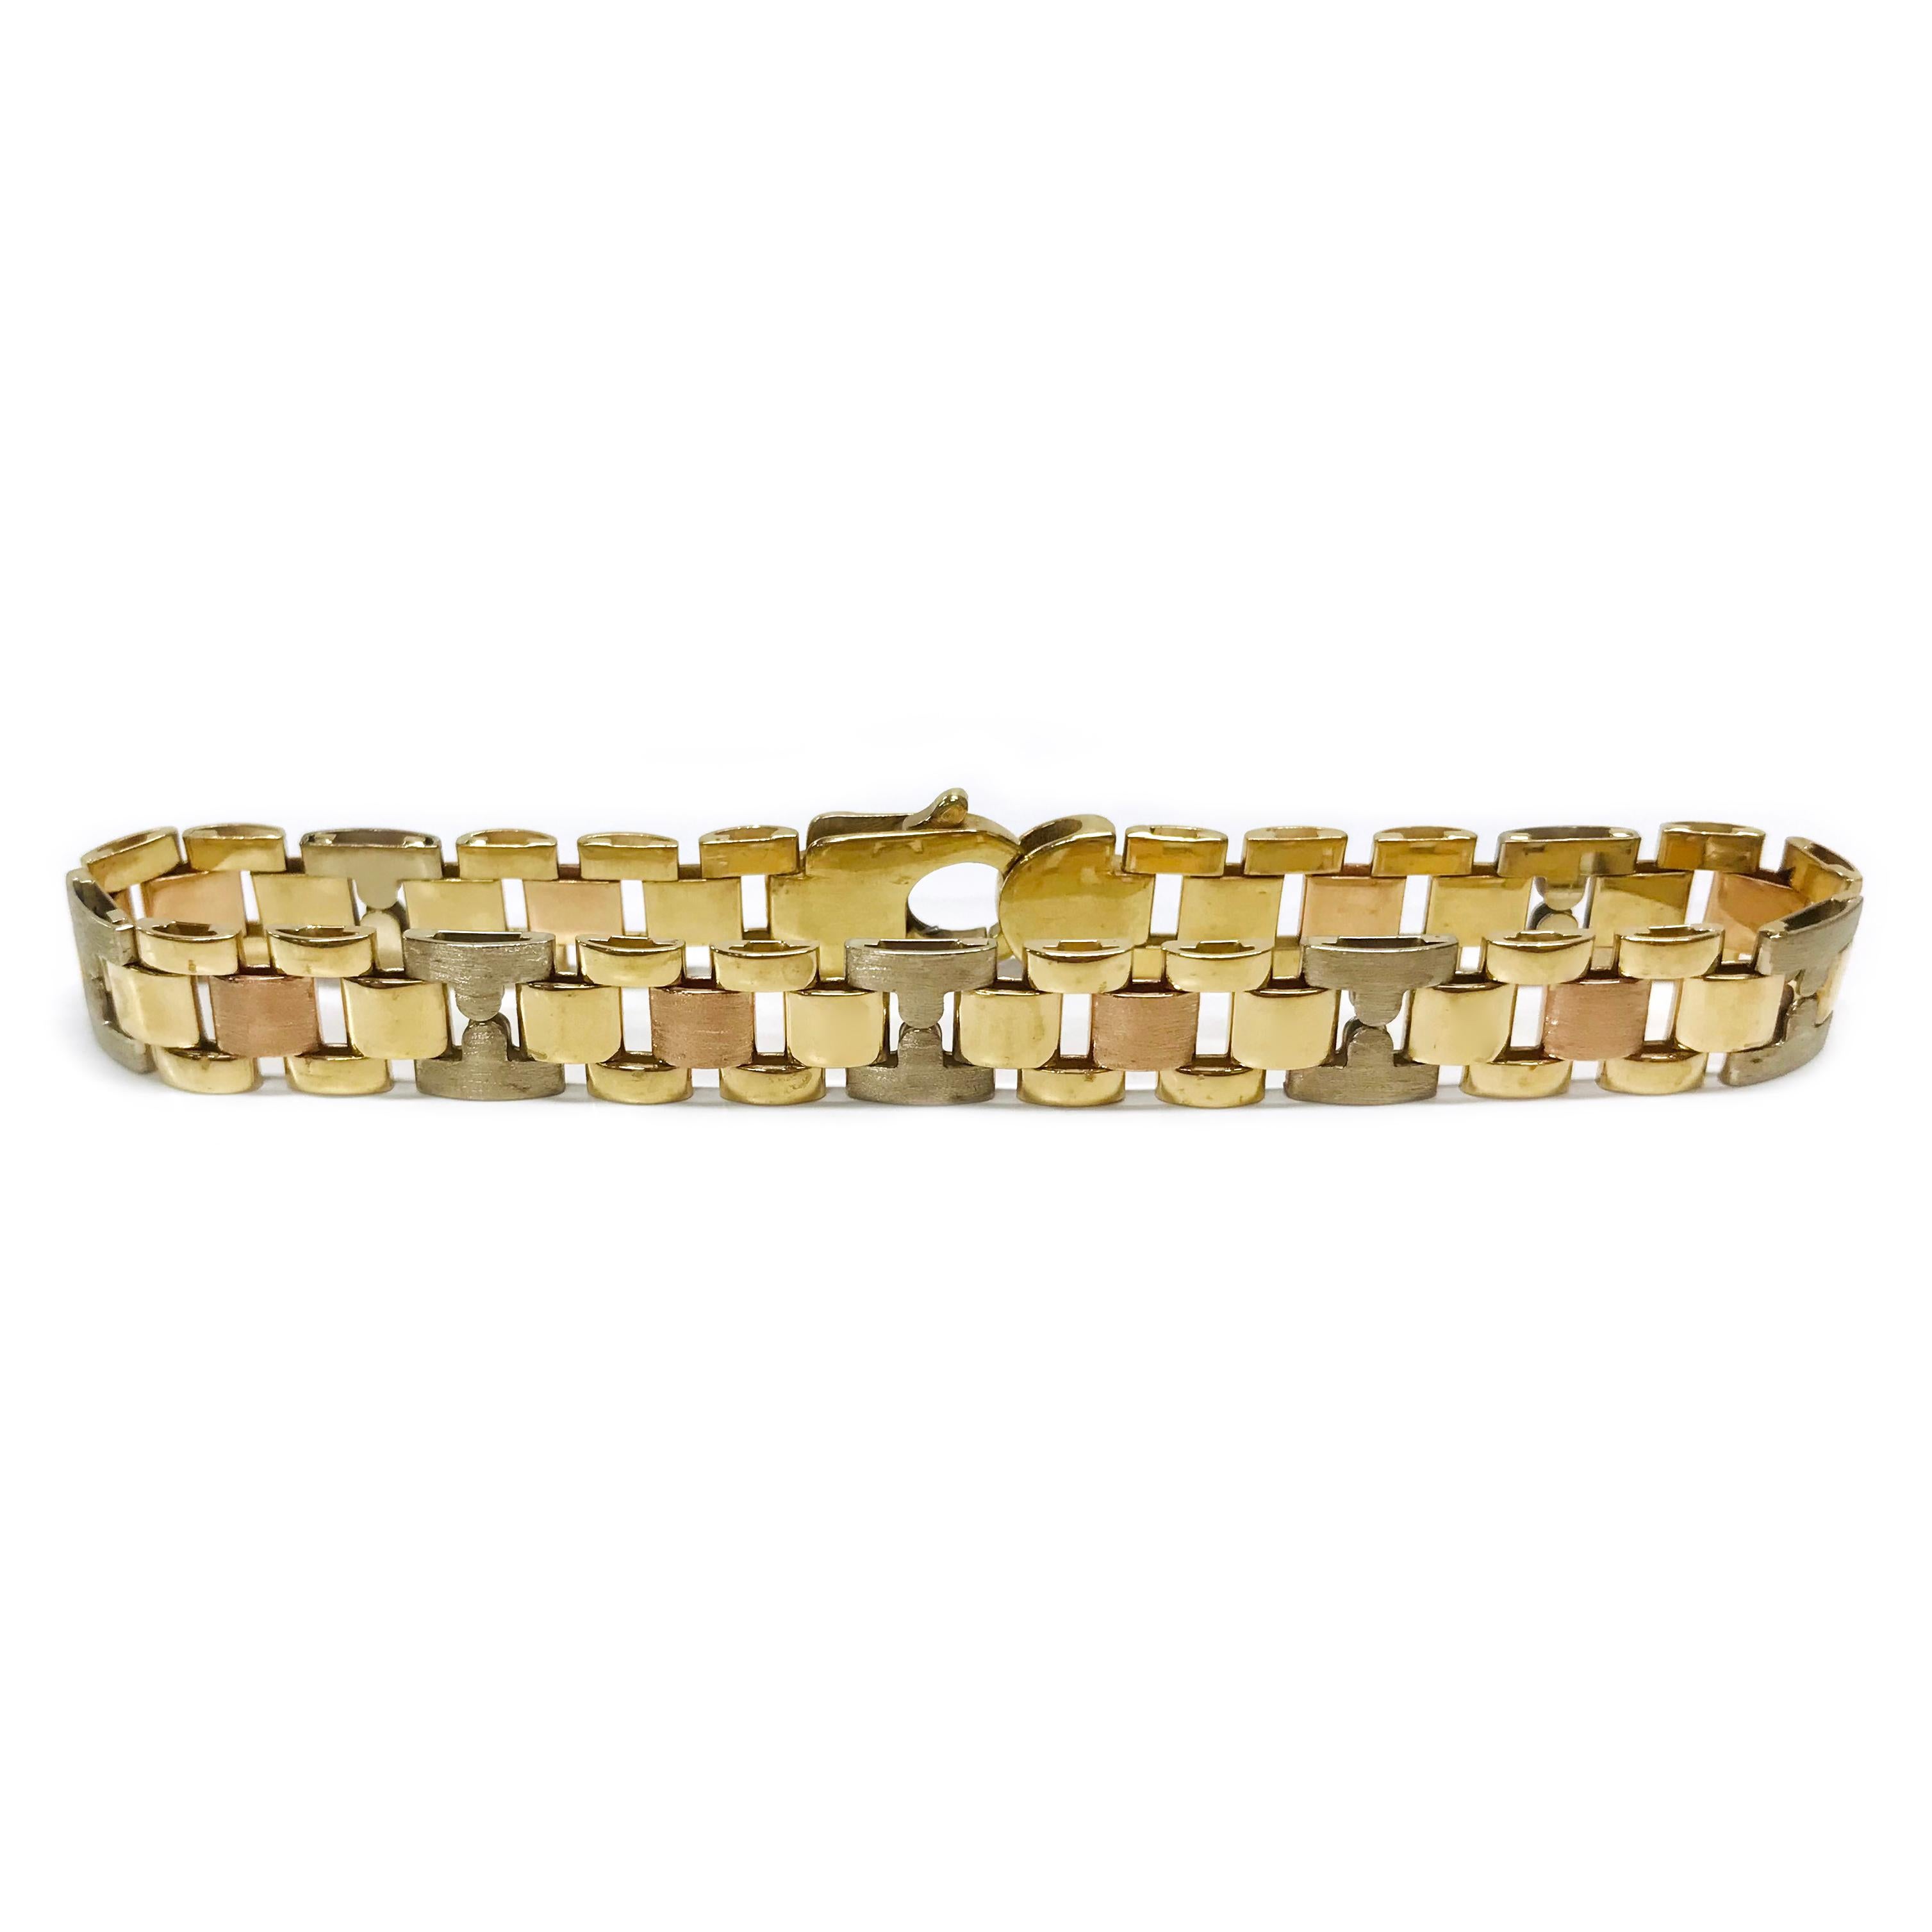 14 Karat Two-Tone Link Bracelet. This bracelet features rose gold square links and yellow gold rectangular links. The rose gold links have a florentine finish and seven yellow gold links have a florentine finish while the rest have a smooth shiny